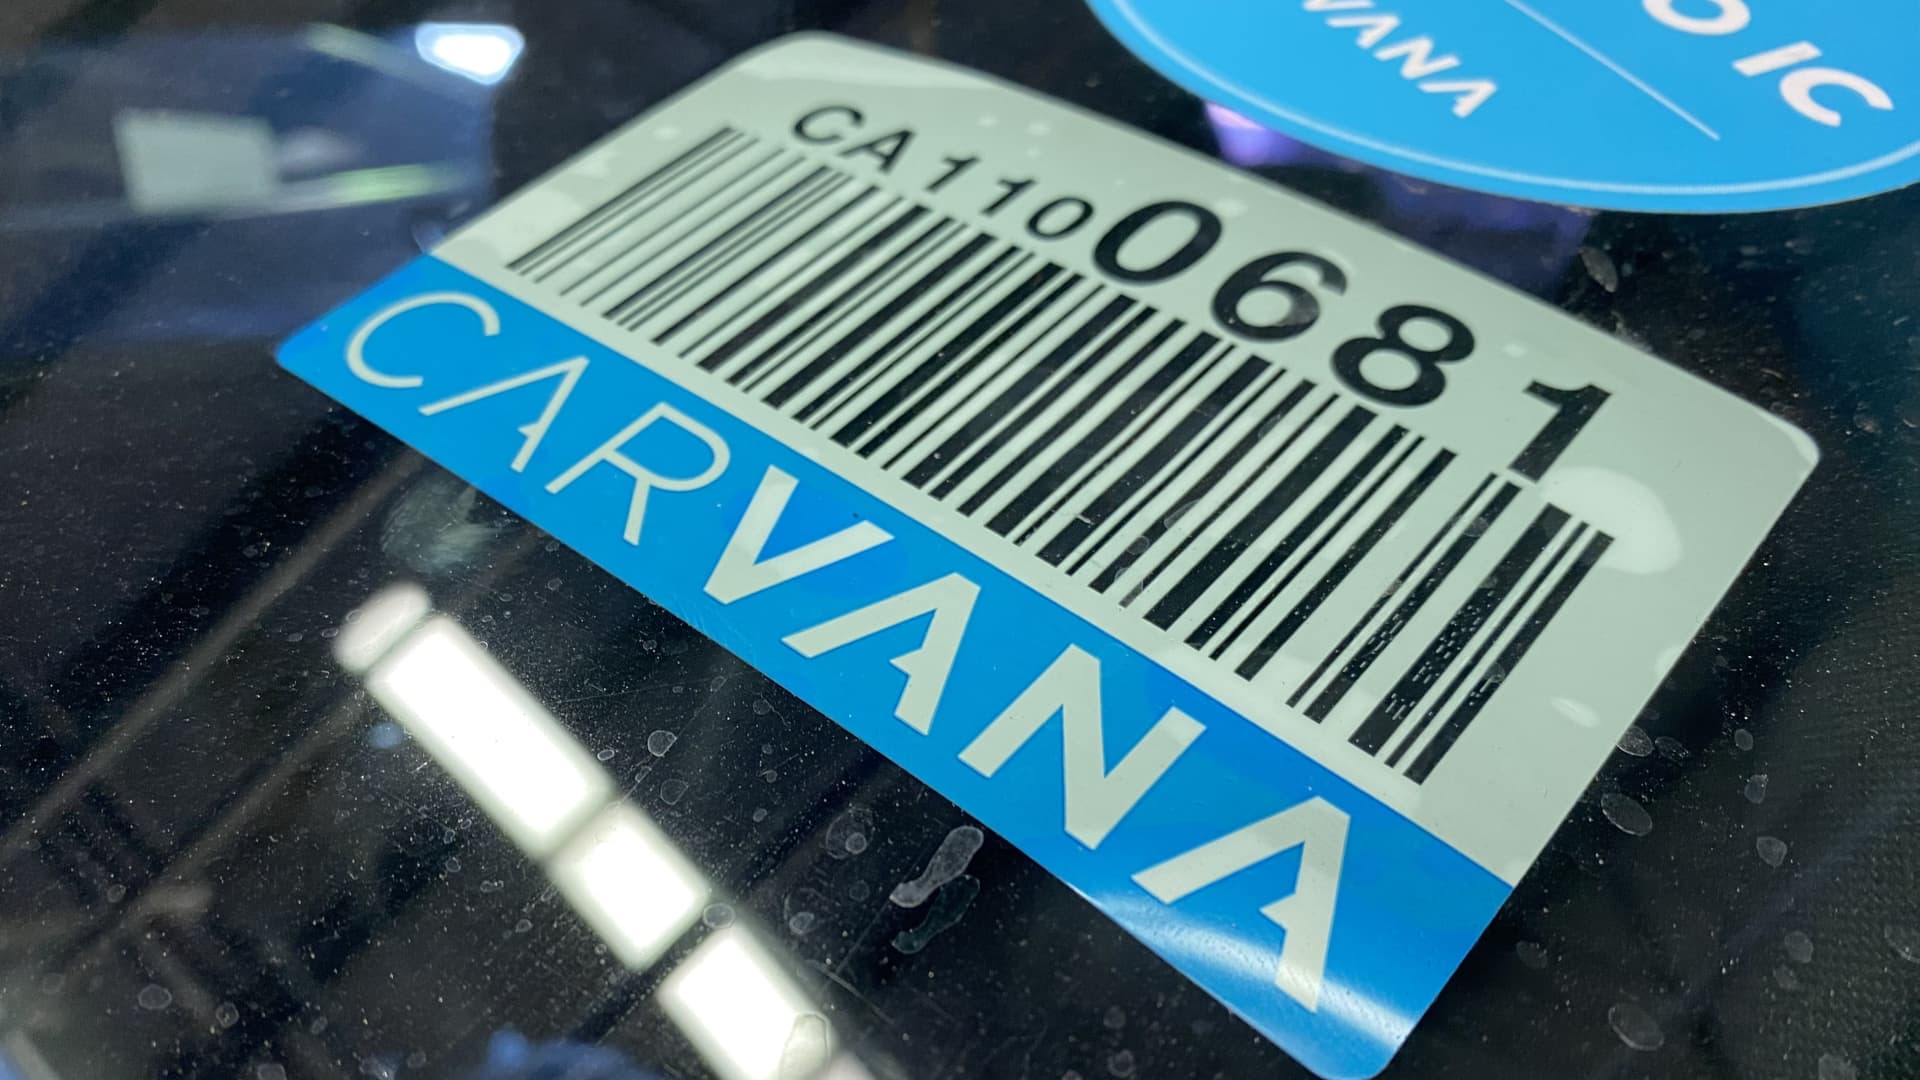 Each vehicle that enters Carvana's reconditioning center has a barcode sticker to assist in tracking the vehicle through its process as it prepares to be sold.